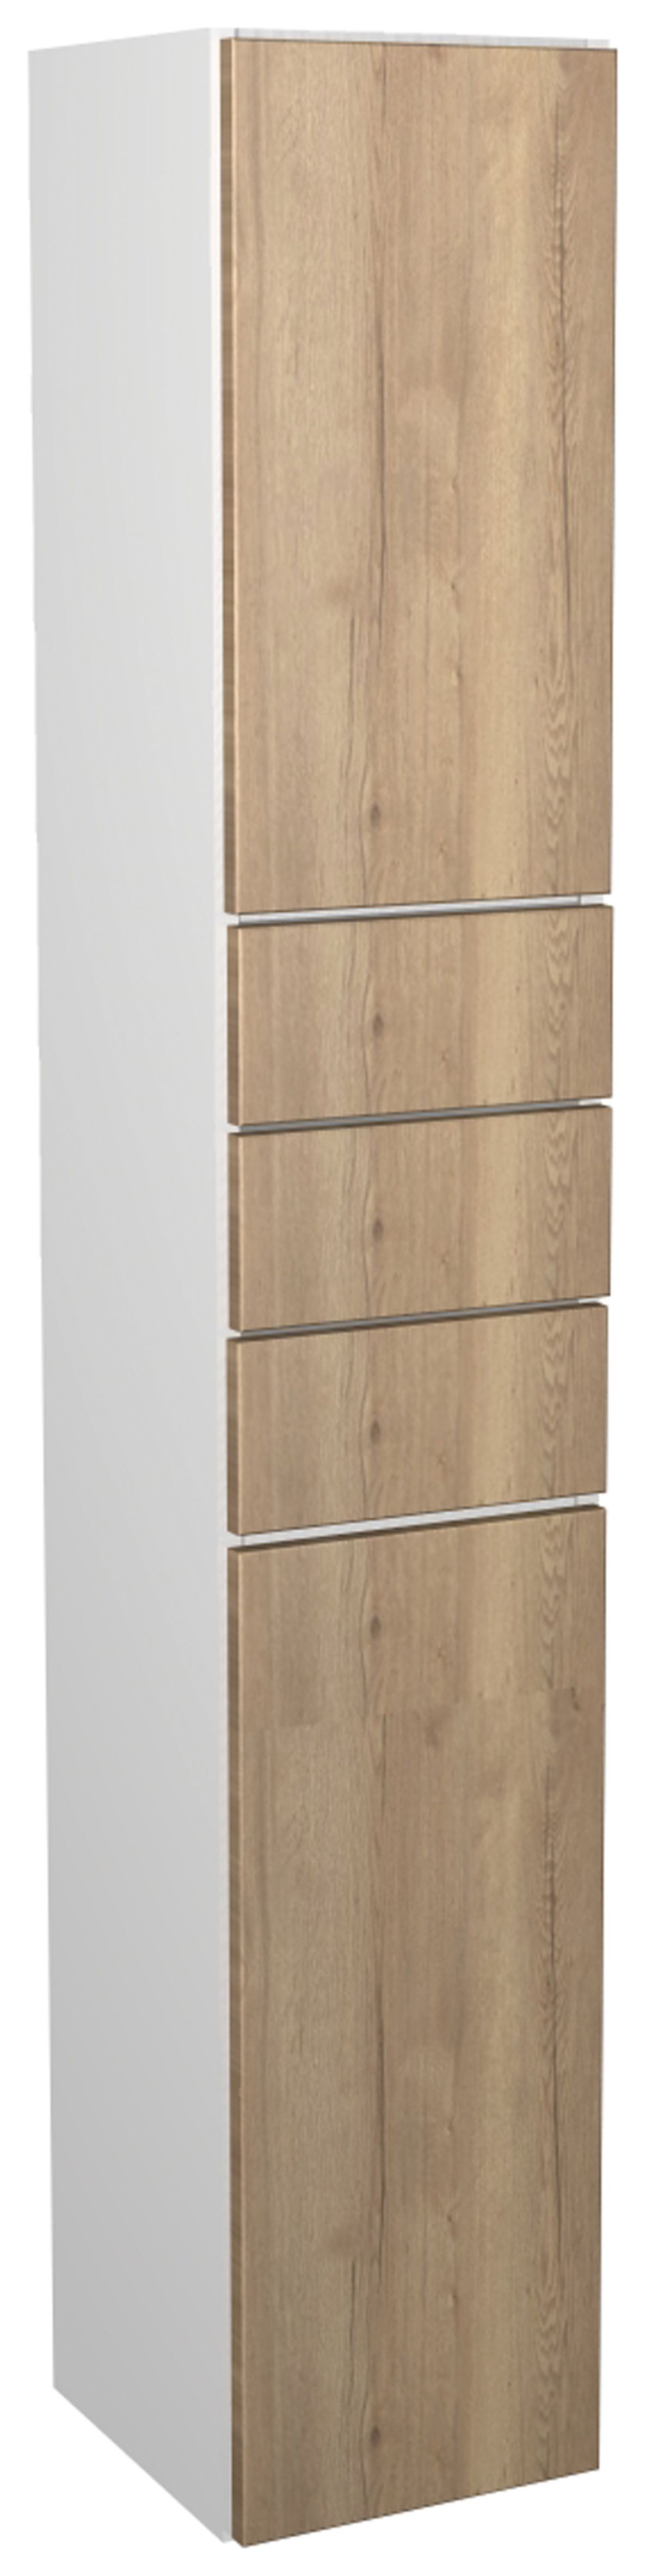 Image of Wickes Vienna Oak Tower Unit with Drawers - 300 x 1762mm